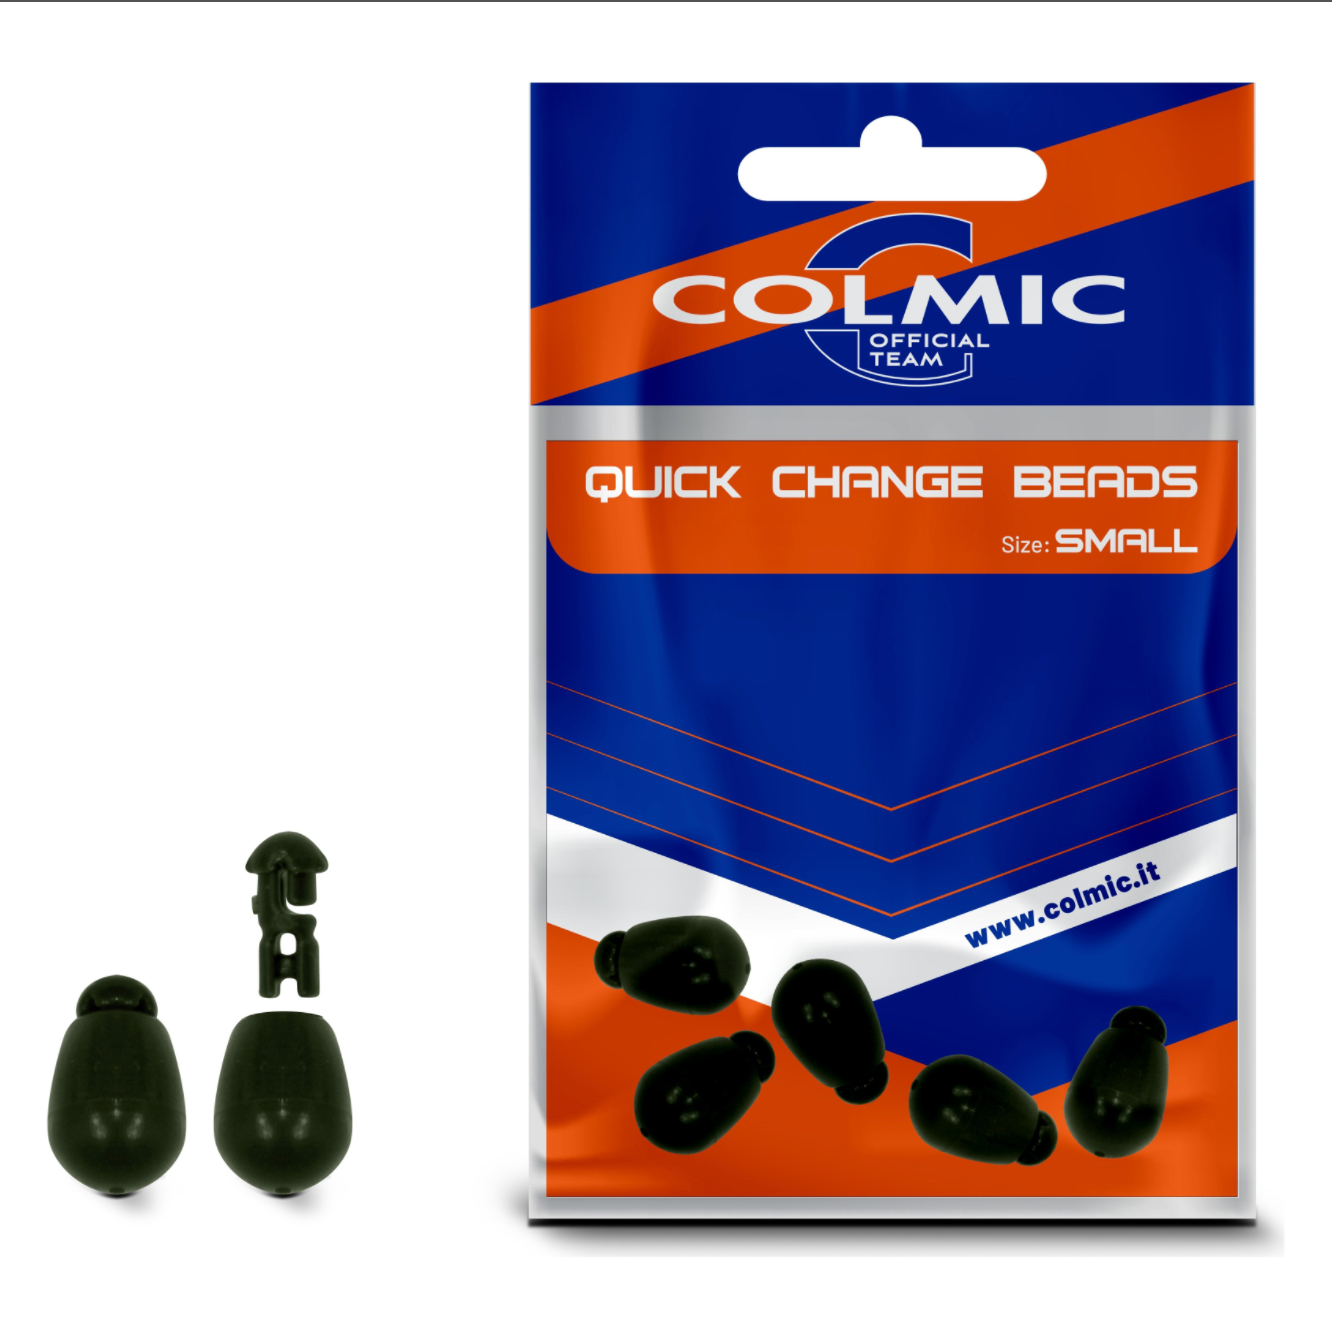 Colmic Quick Change Beads